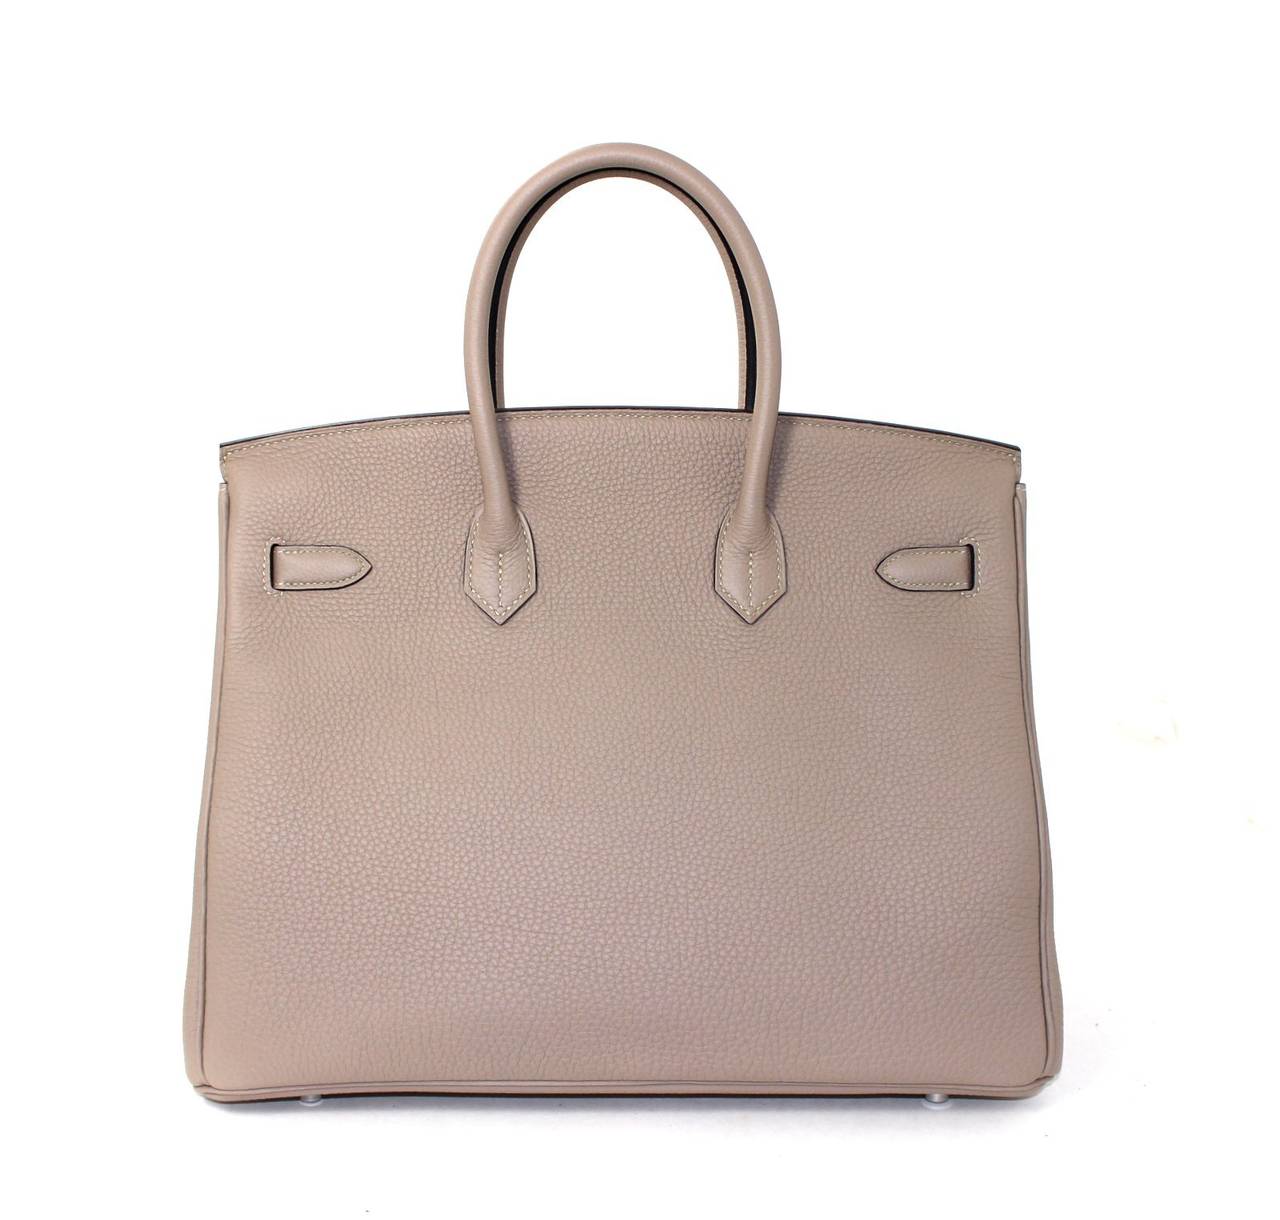 Pristine, store fresh condition (plastic on hardware) Hermès Birkin Bag in Gris Tourterelle Togo Leather with Palladium, 35 cm size.   Crafted by hand and considered by many as the epitome of luxury items, Birkins are extremely difficult to get.